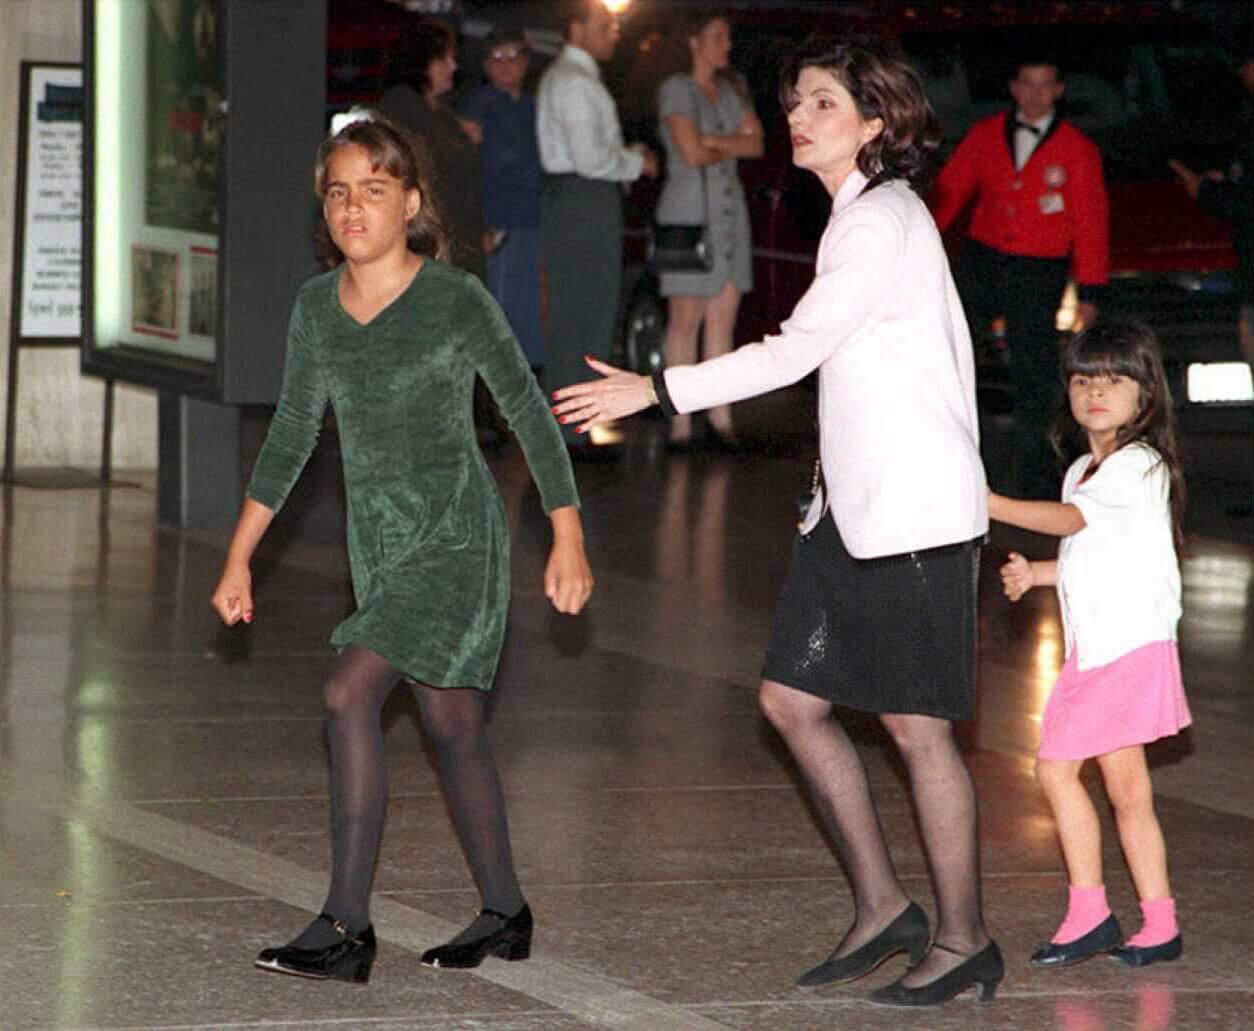 Sydney Simpson, daughter of Nicole Brown Simpson and O.J. Simpson, walking away from Nicole